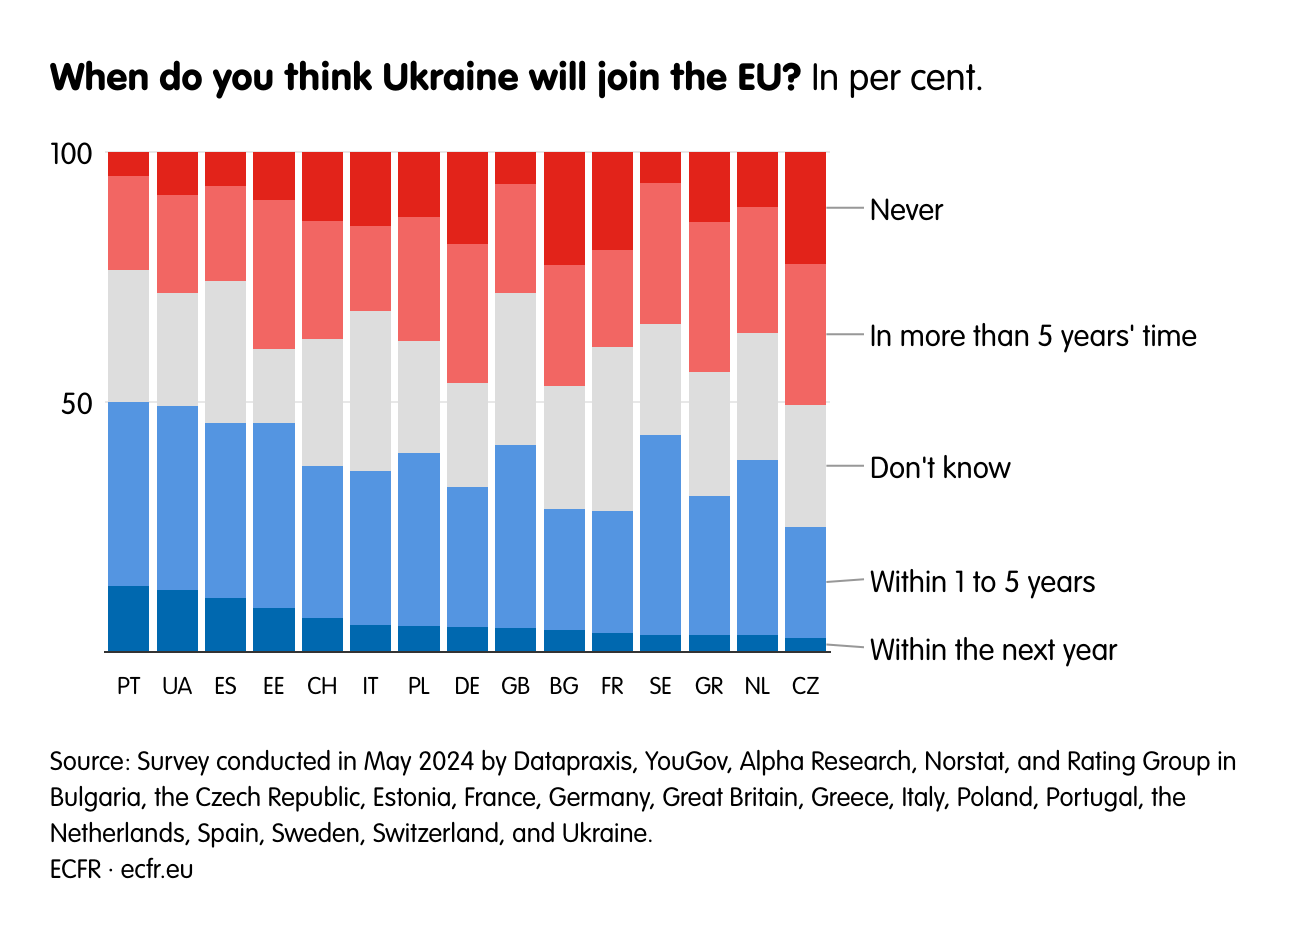 When do you think Ukraine will join the EU?